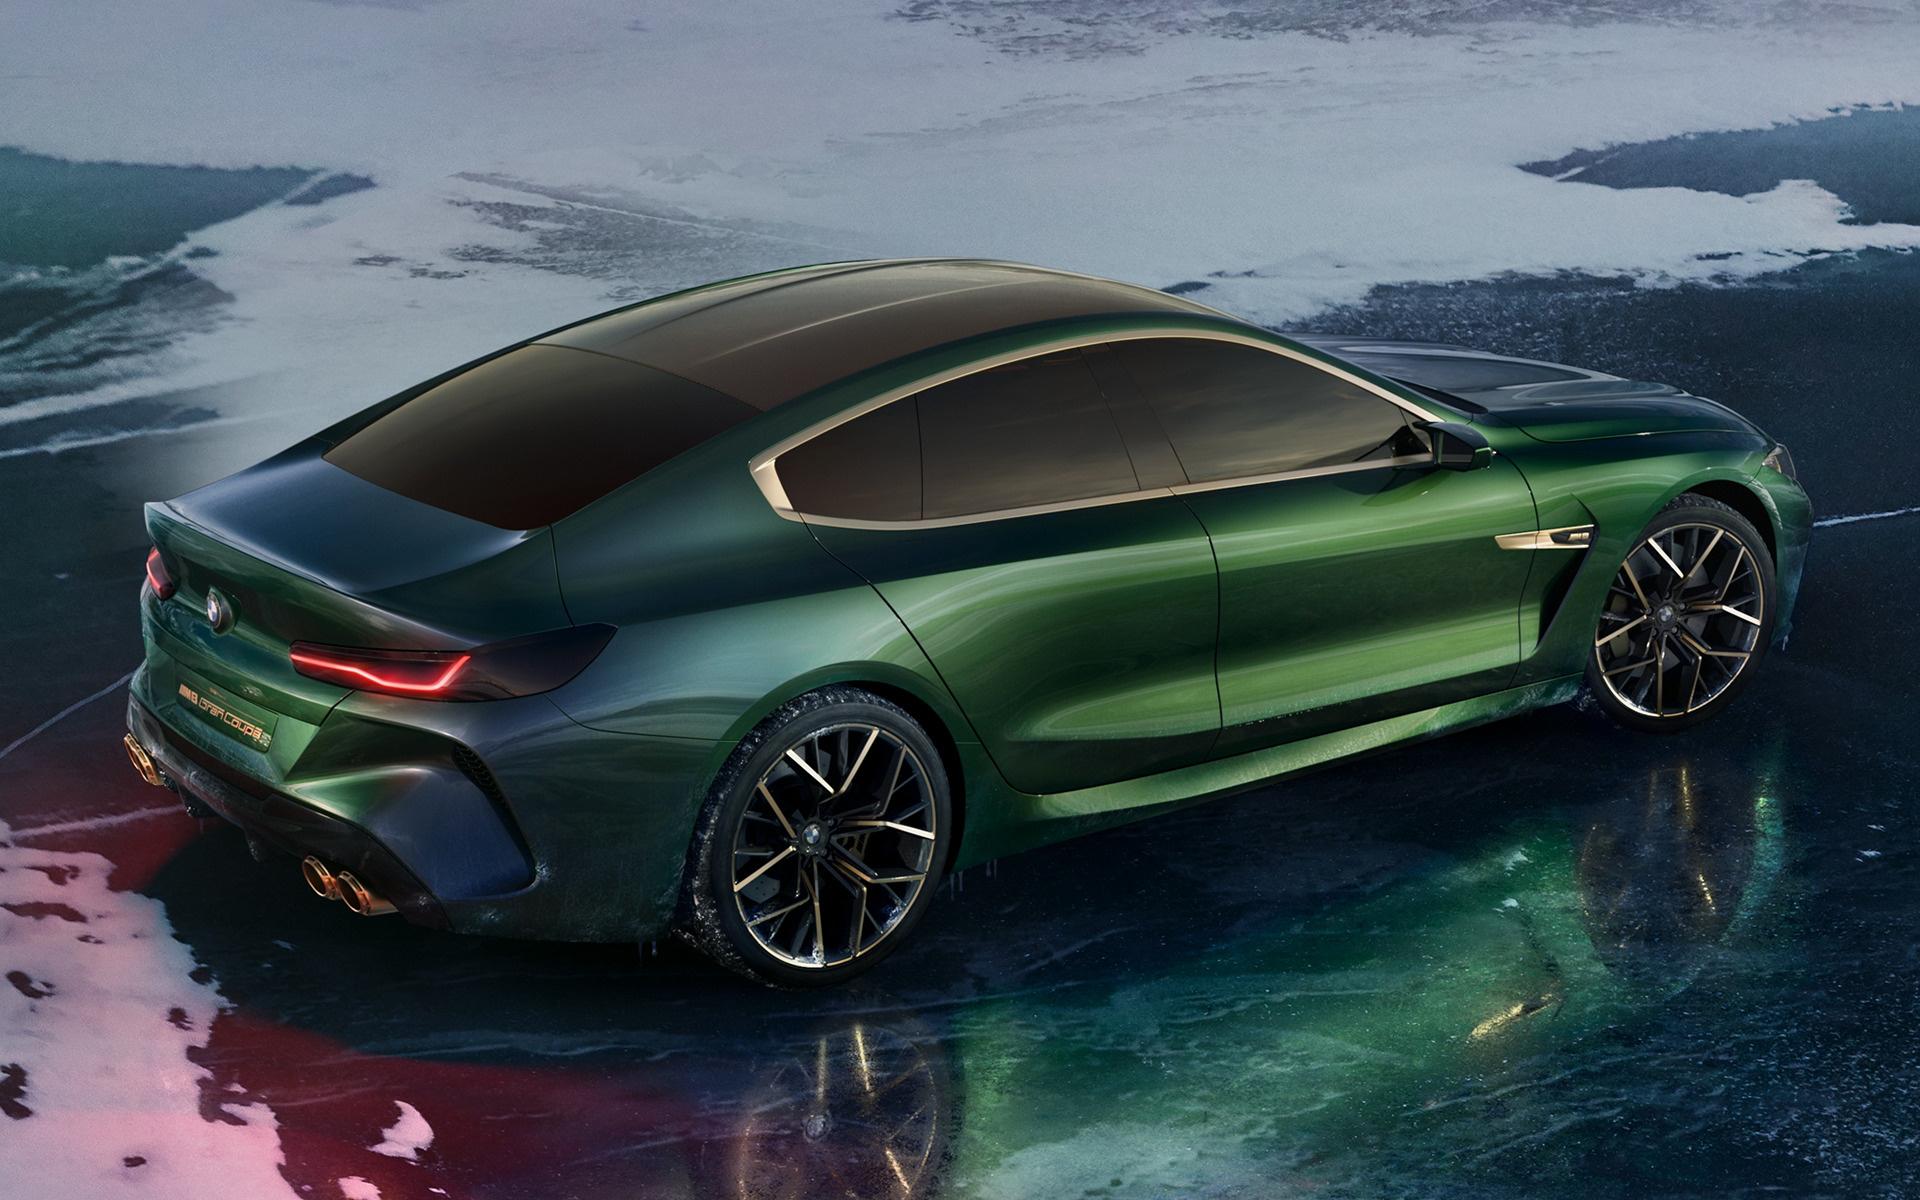 BMW Concept M8 Gran Coupe and HD Image